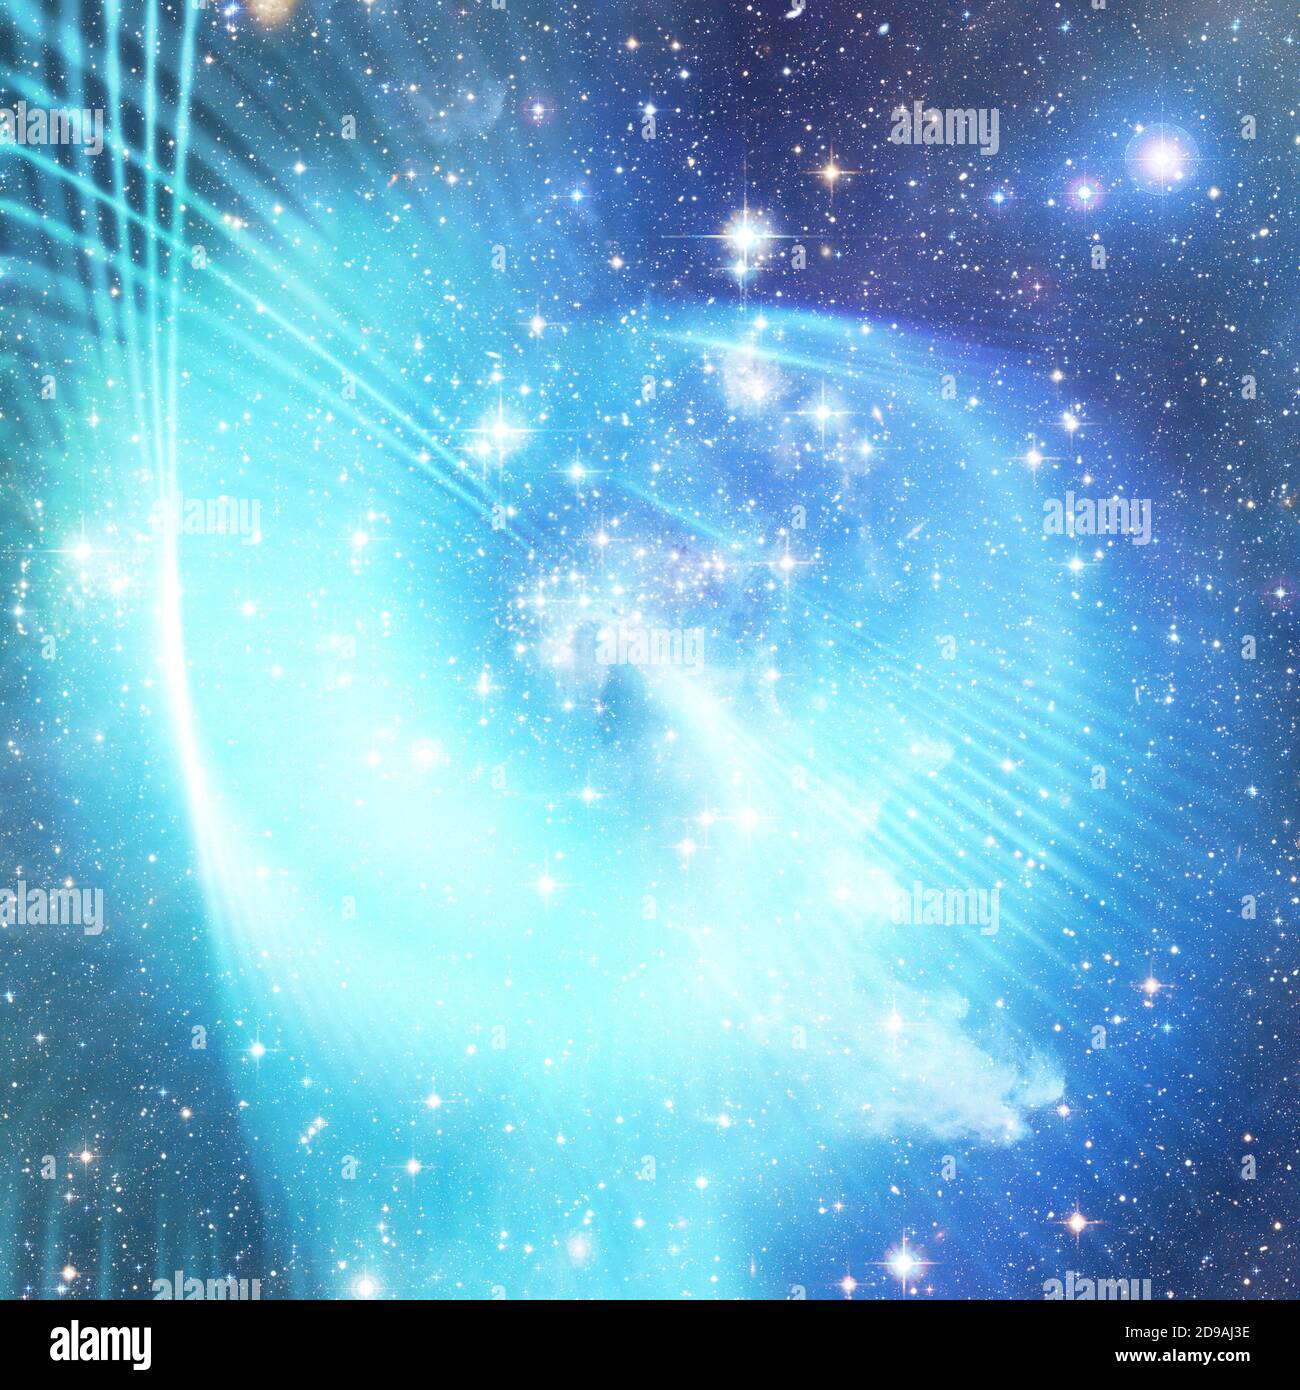 universe background with stars and gravitational waves Stock Photo